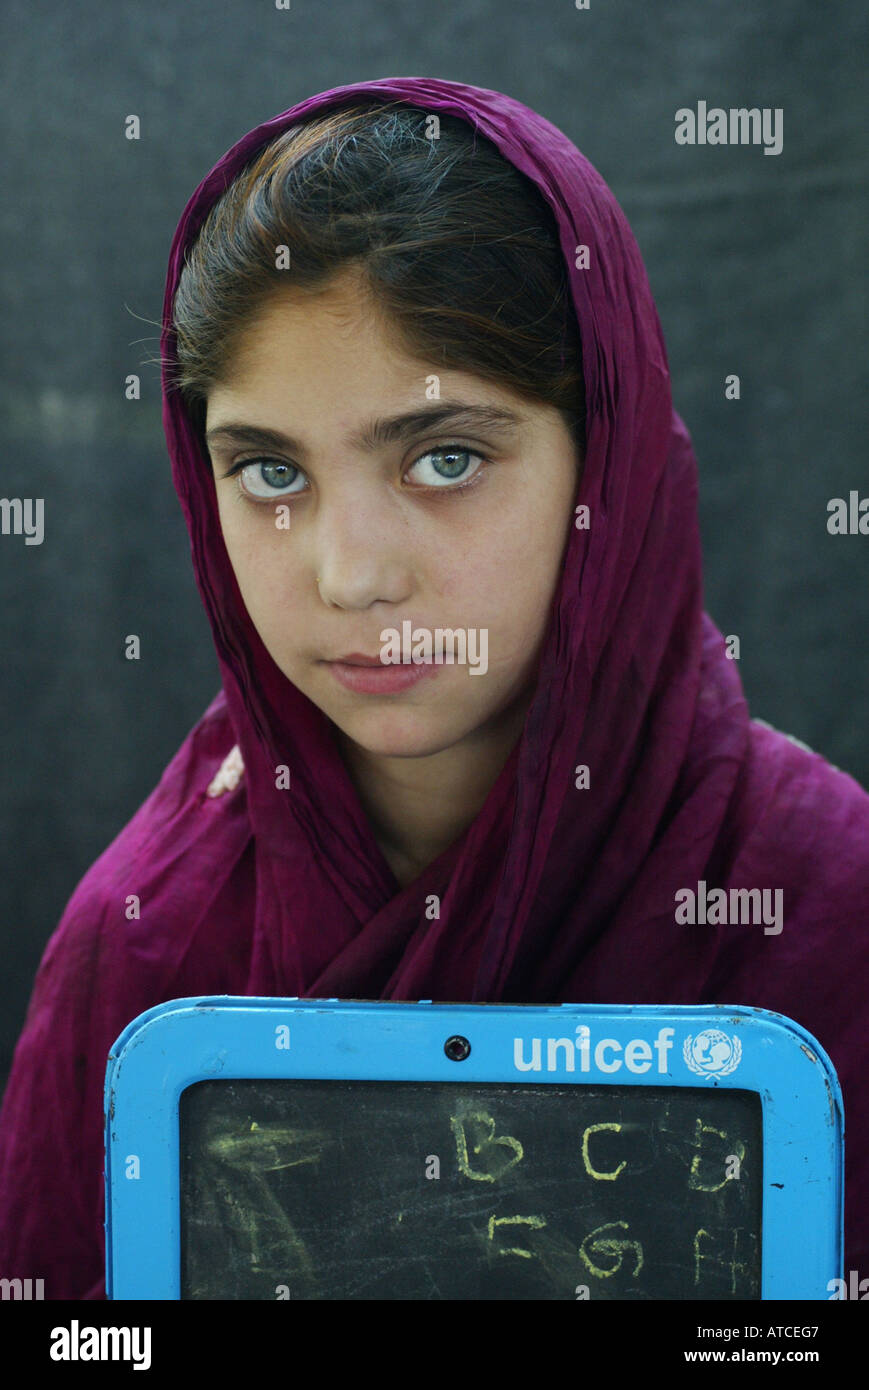 afghan economical refugees in Peshawar are forced to return to Afghanistan Stock Photo